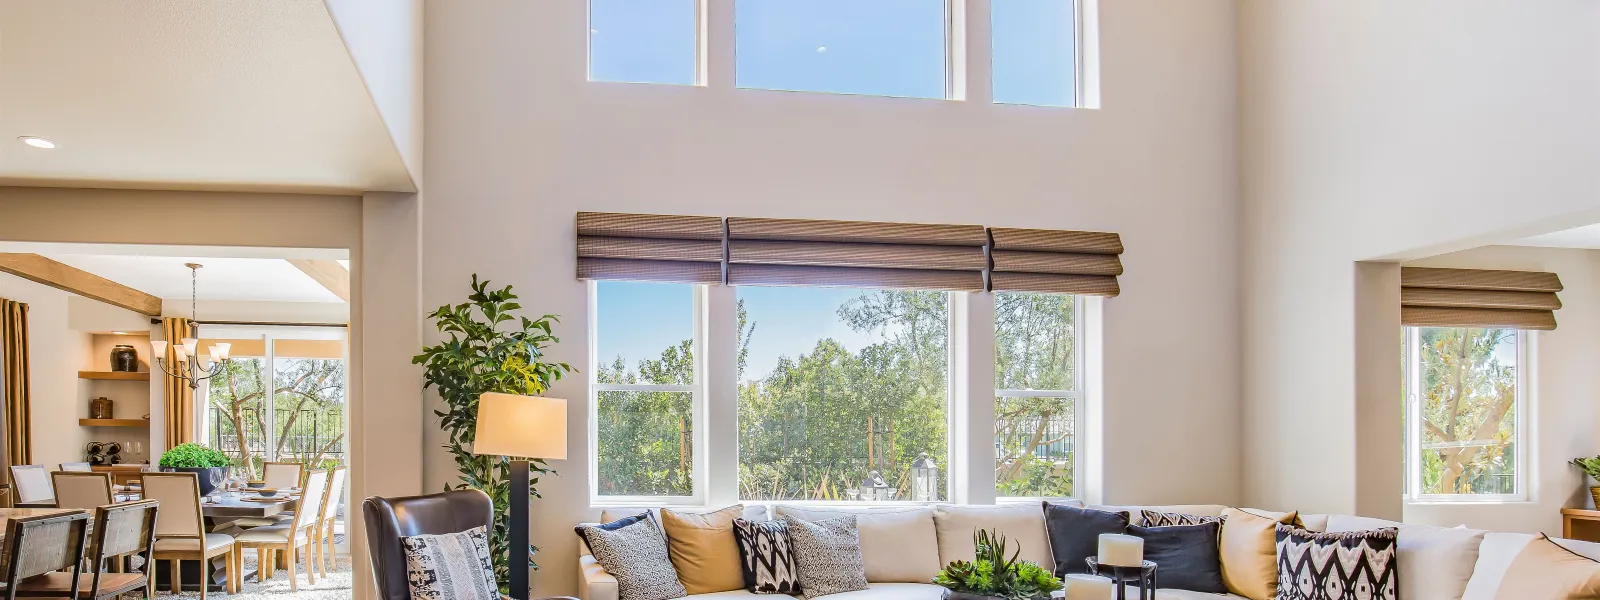 Upgrade Your Home with Expo Home Improvement's Custom-Made Windows